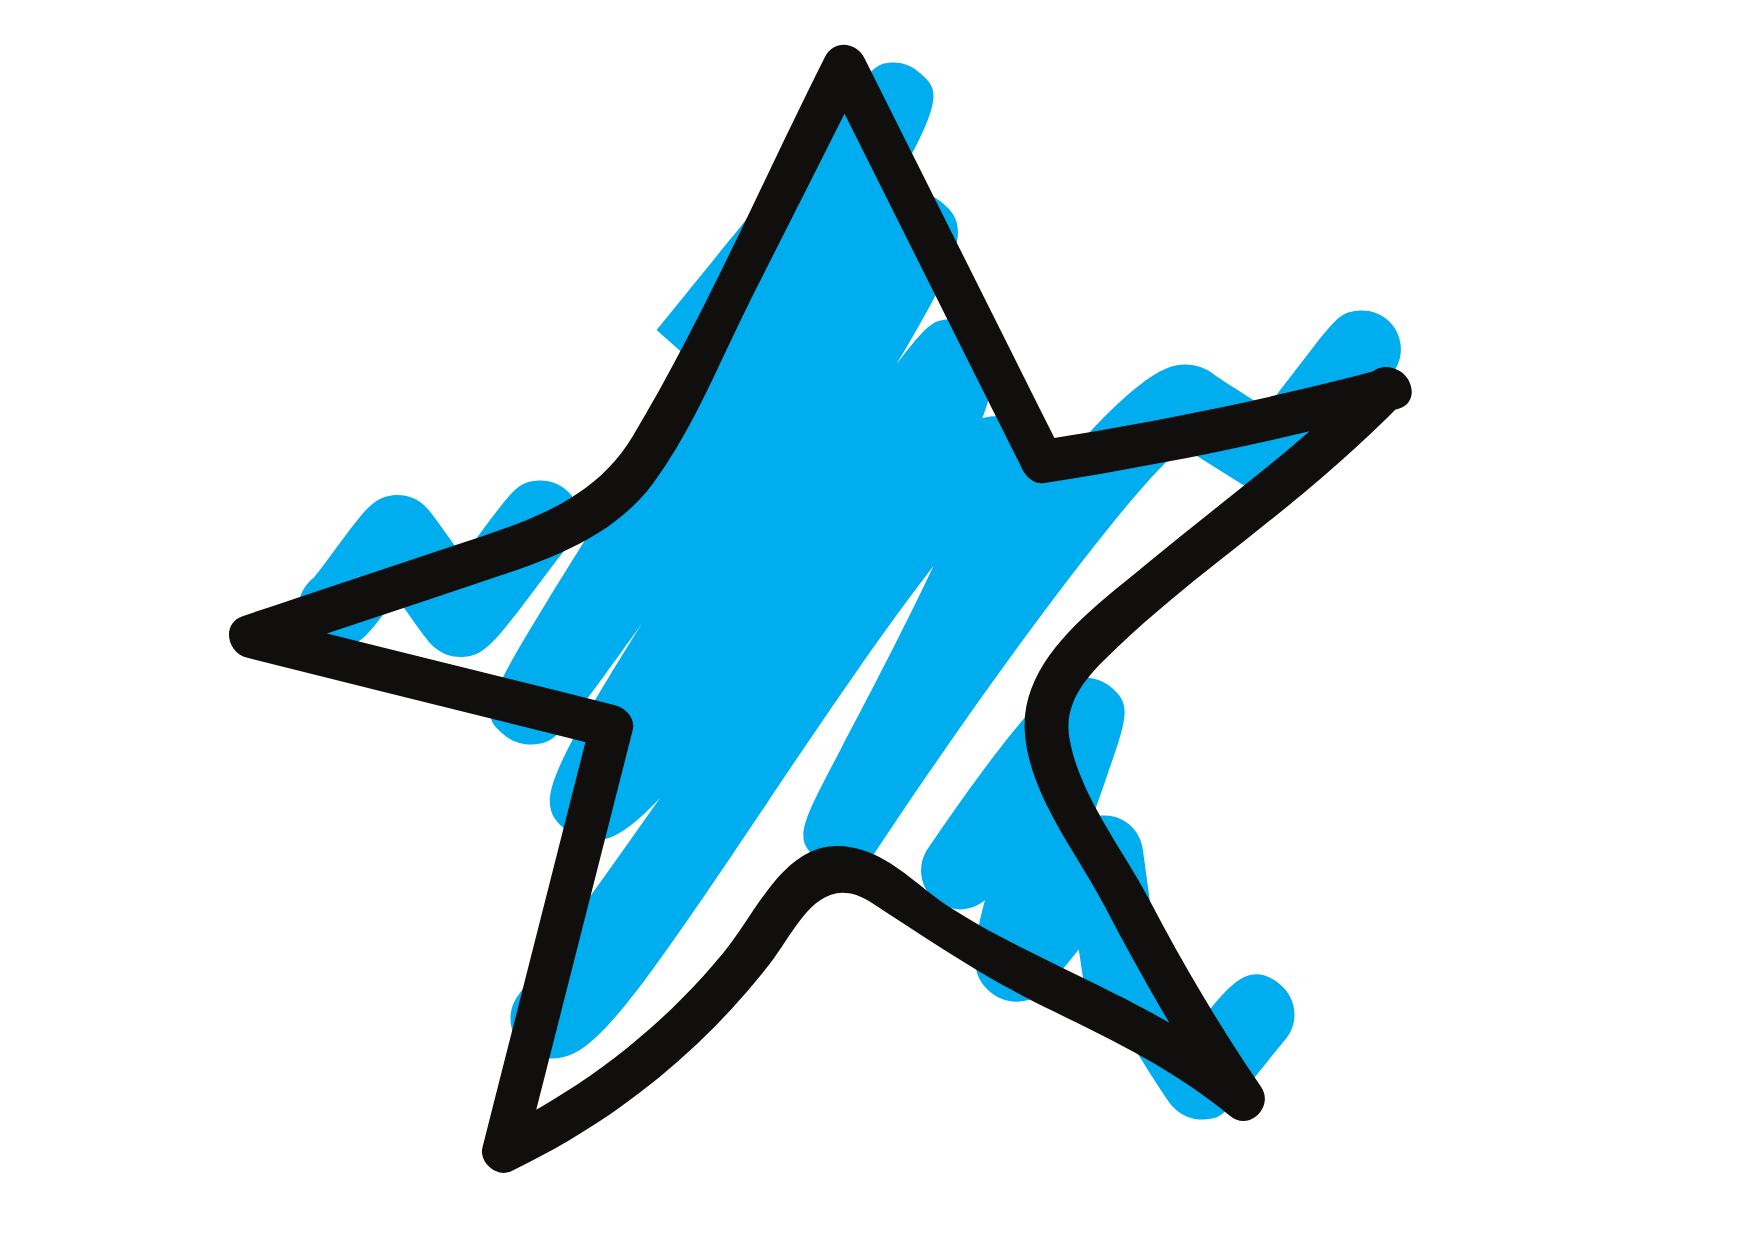 bright blue doodle star